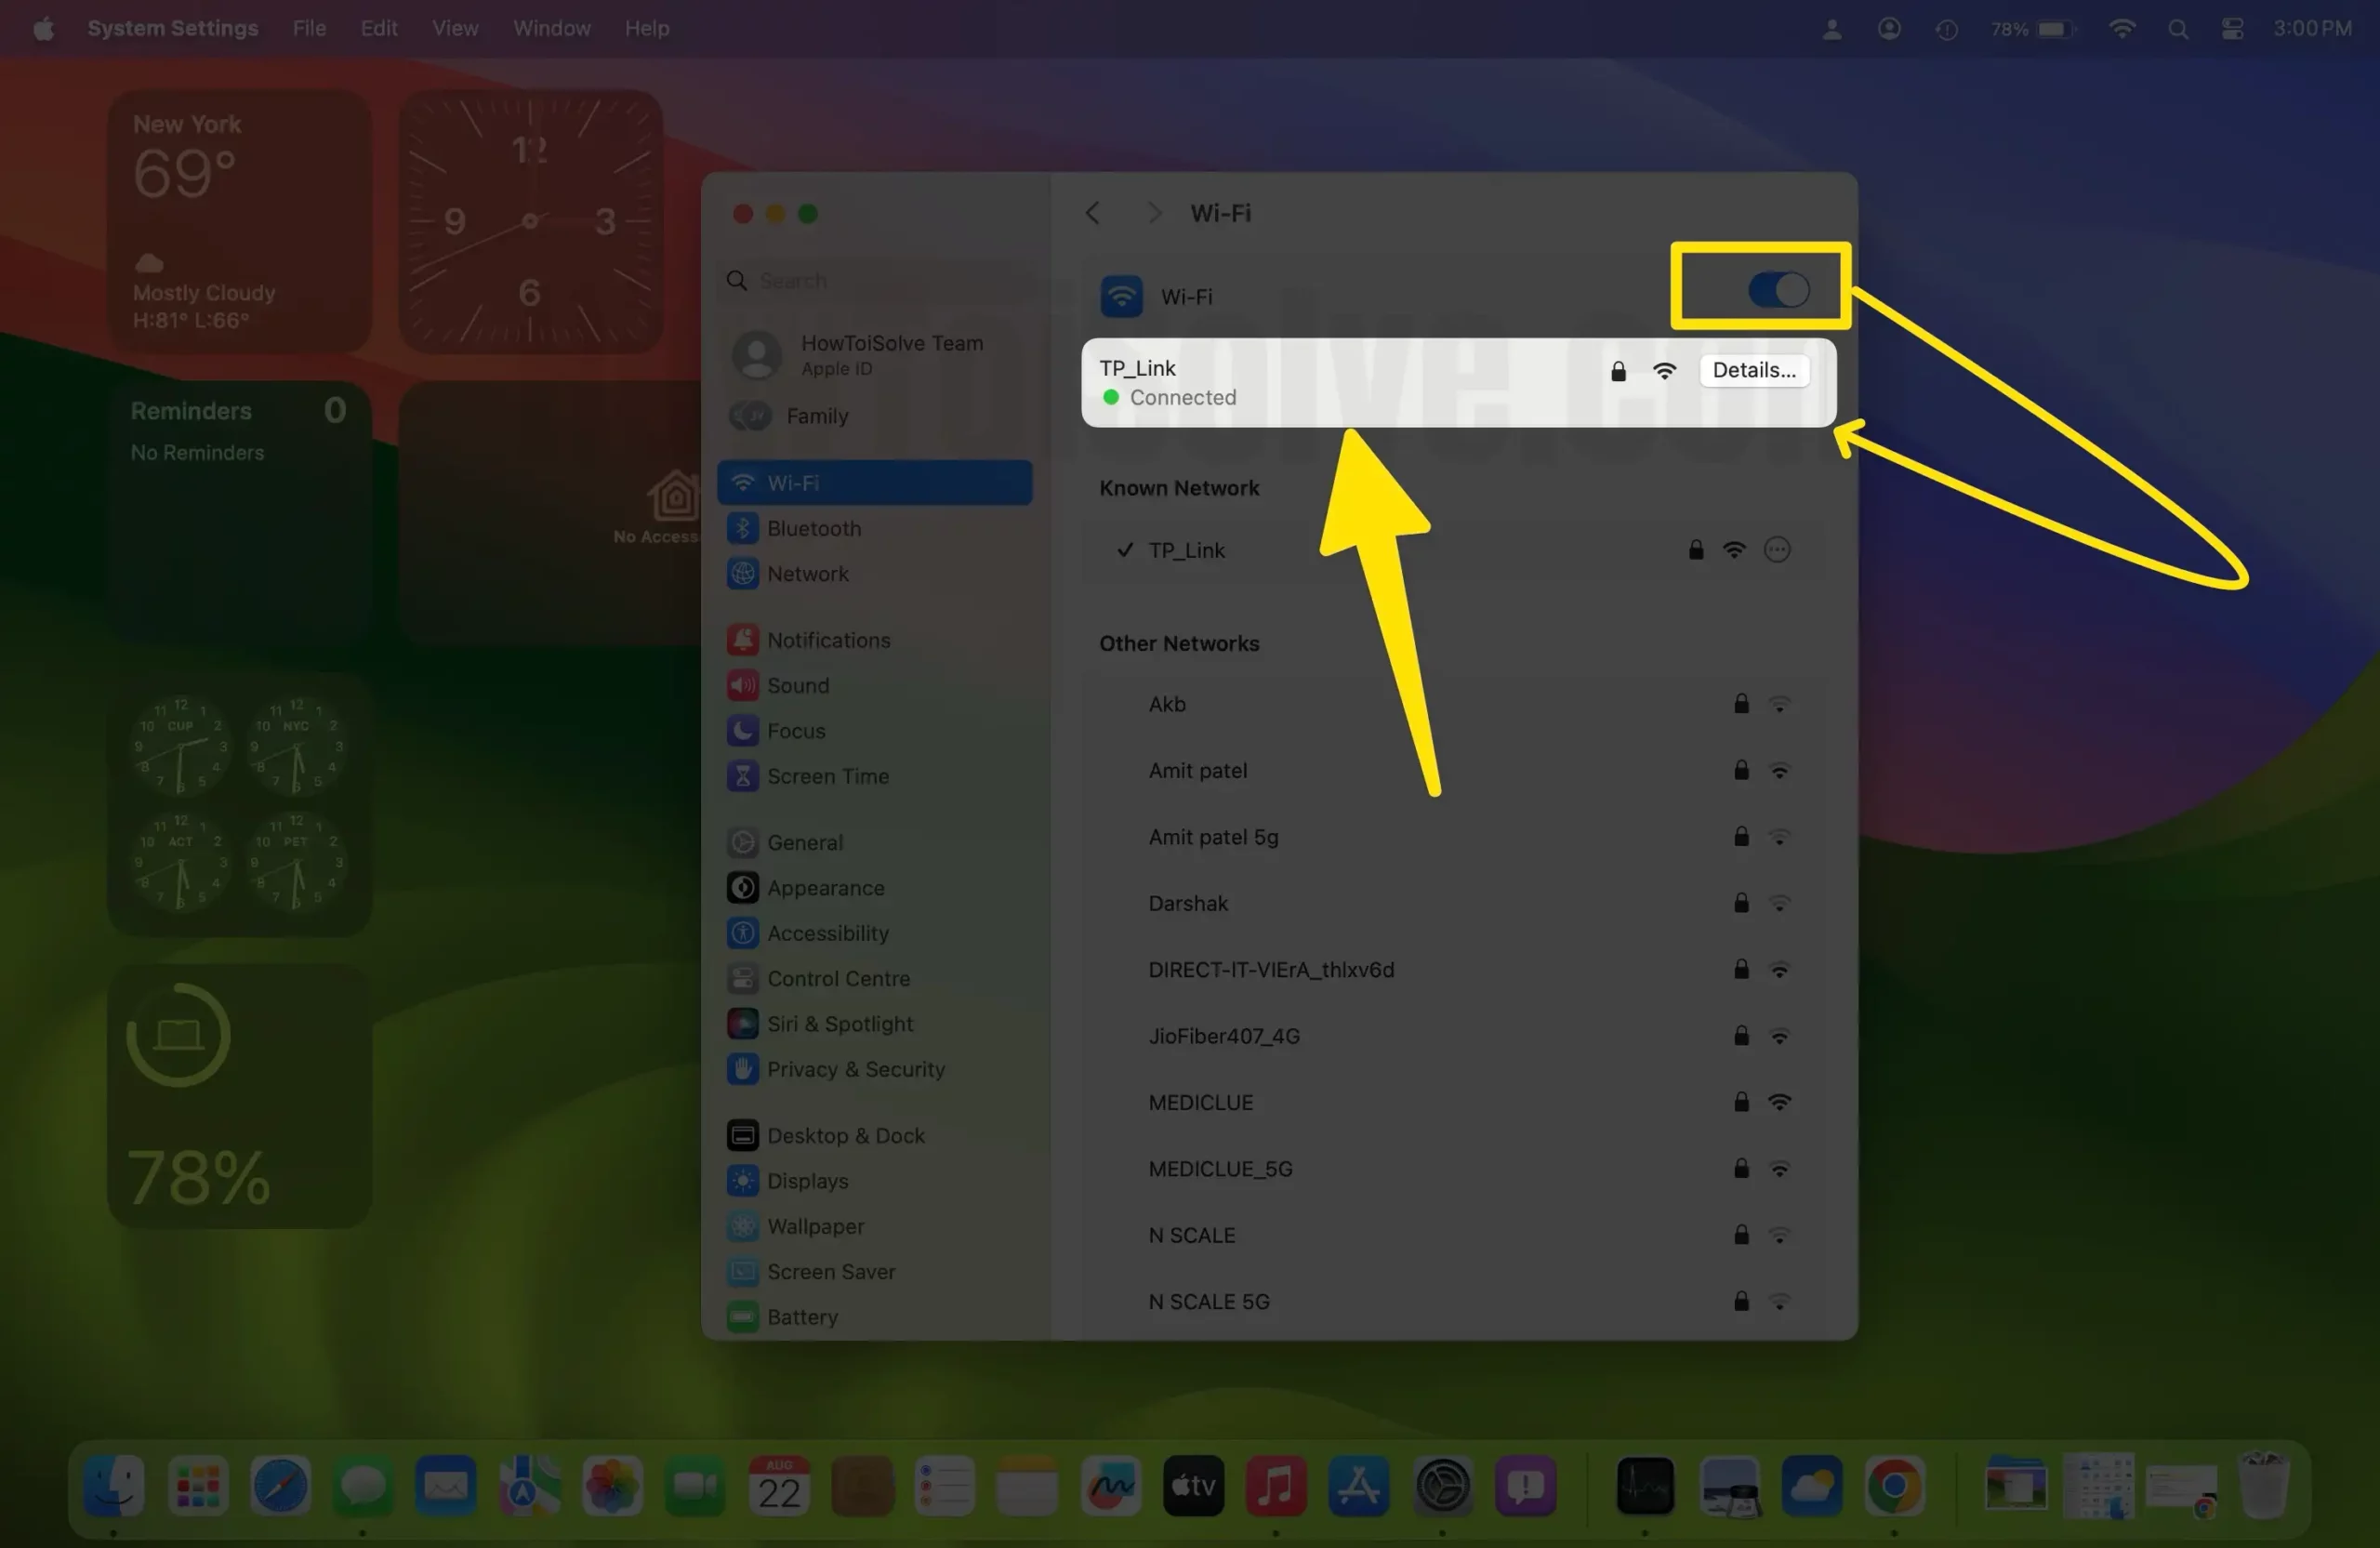 Turn on WiFi and Make Sure Connected to Mac